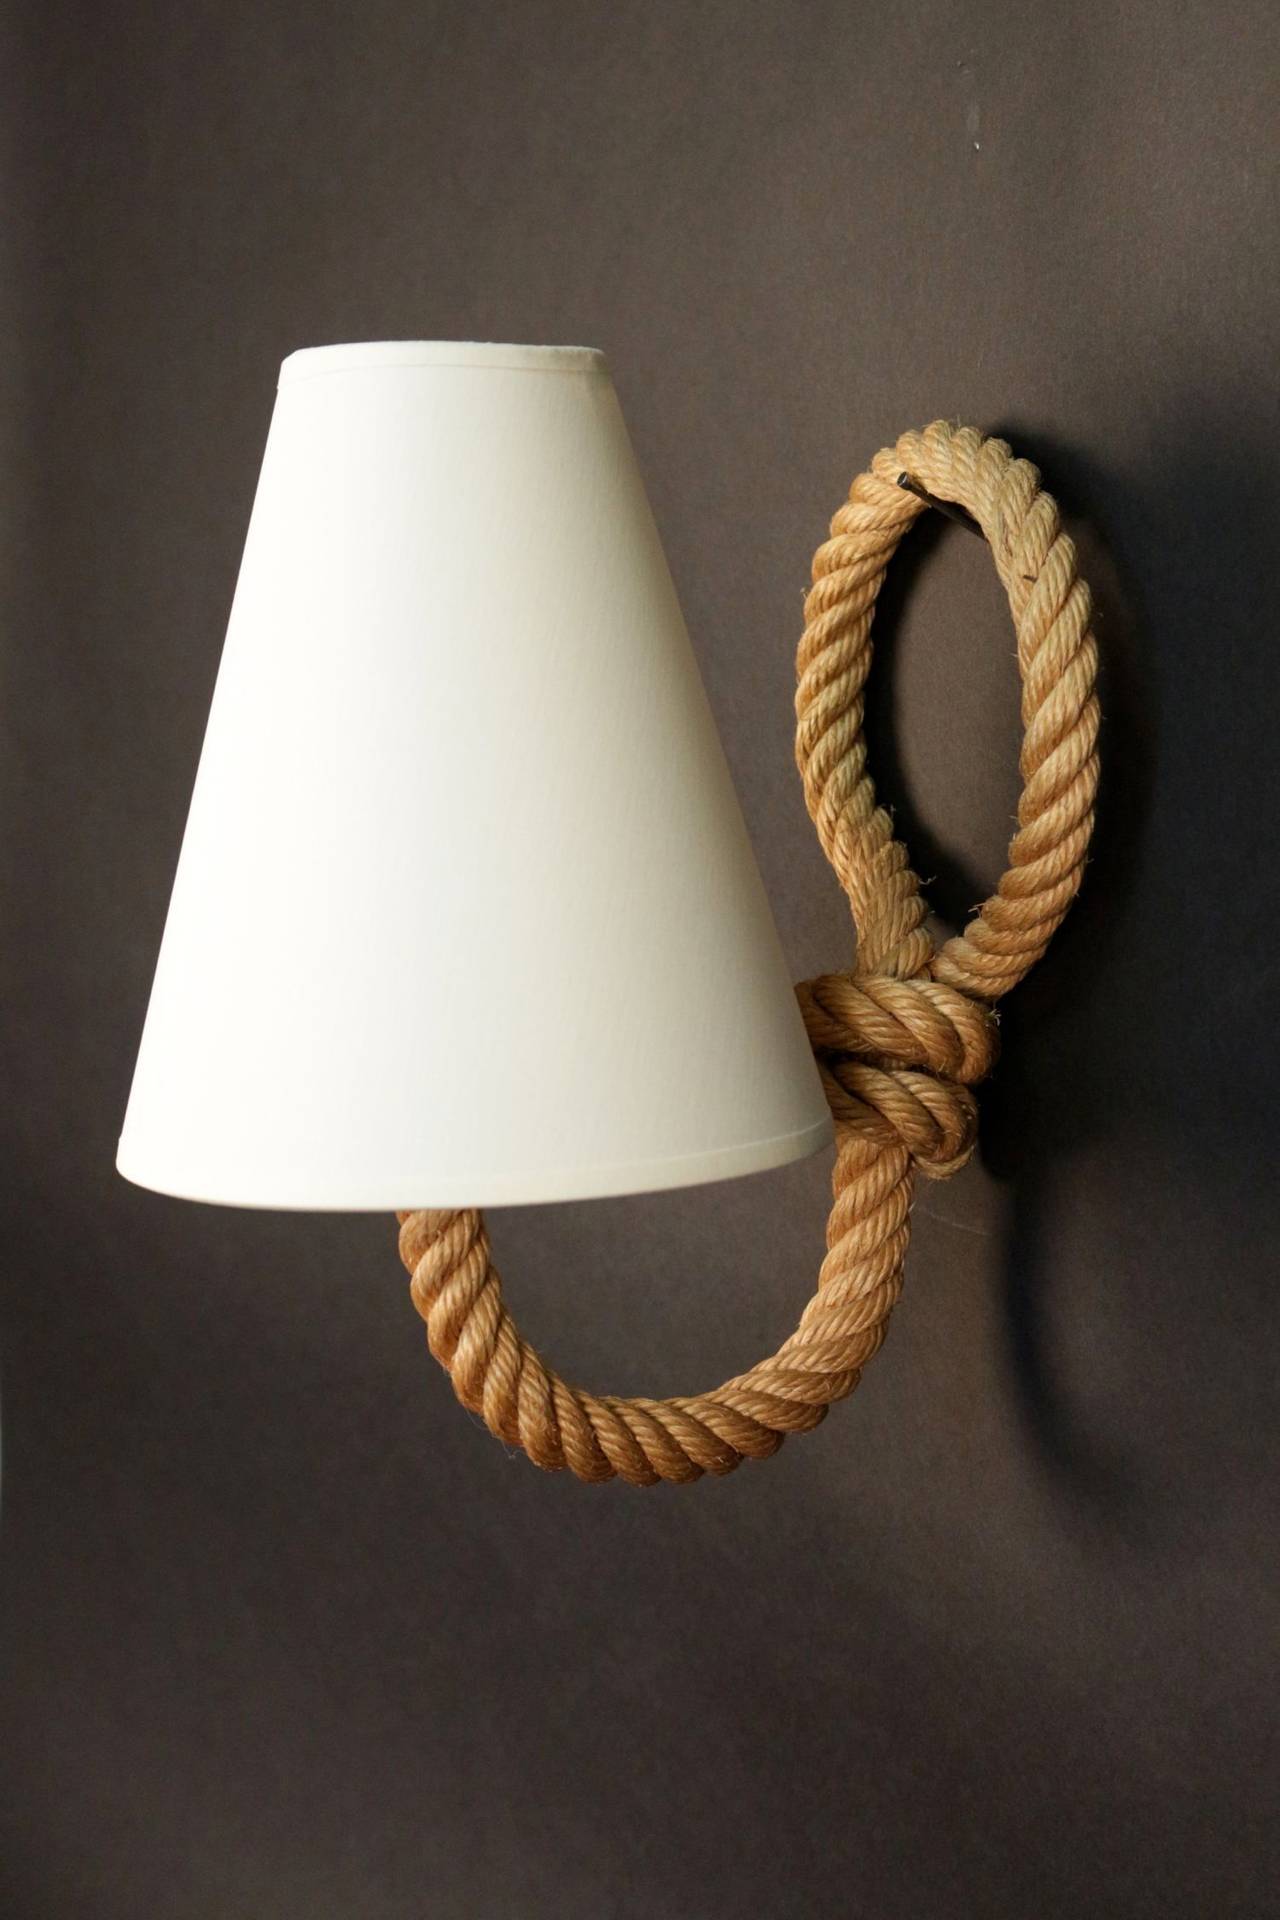 Pair of 1950s rope sconces by Adrien Audoux and Frida Minet. One lighted arm per sconce. New lamp shade.